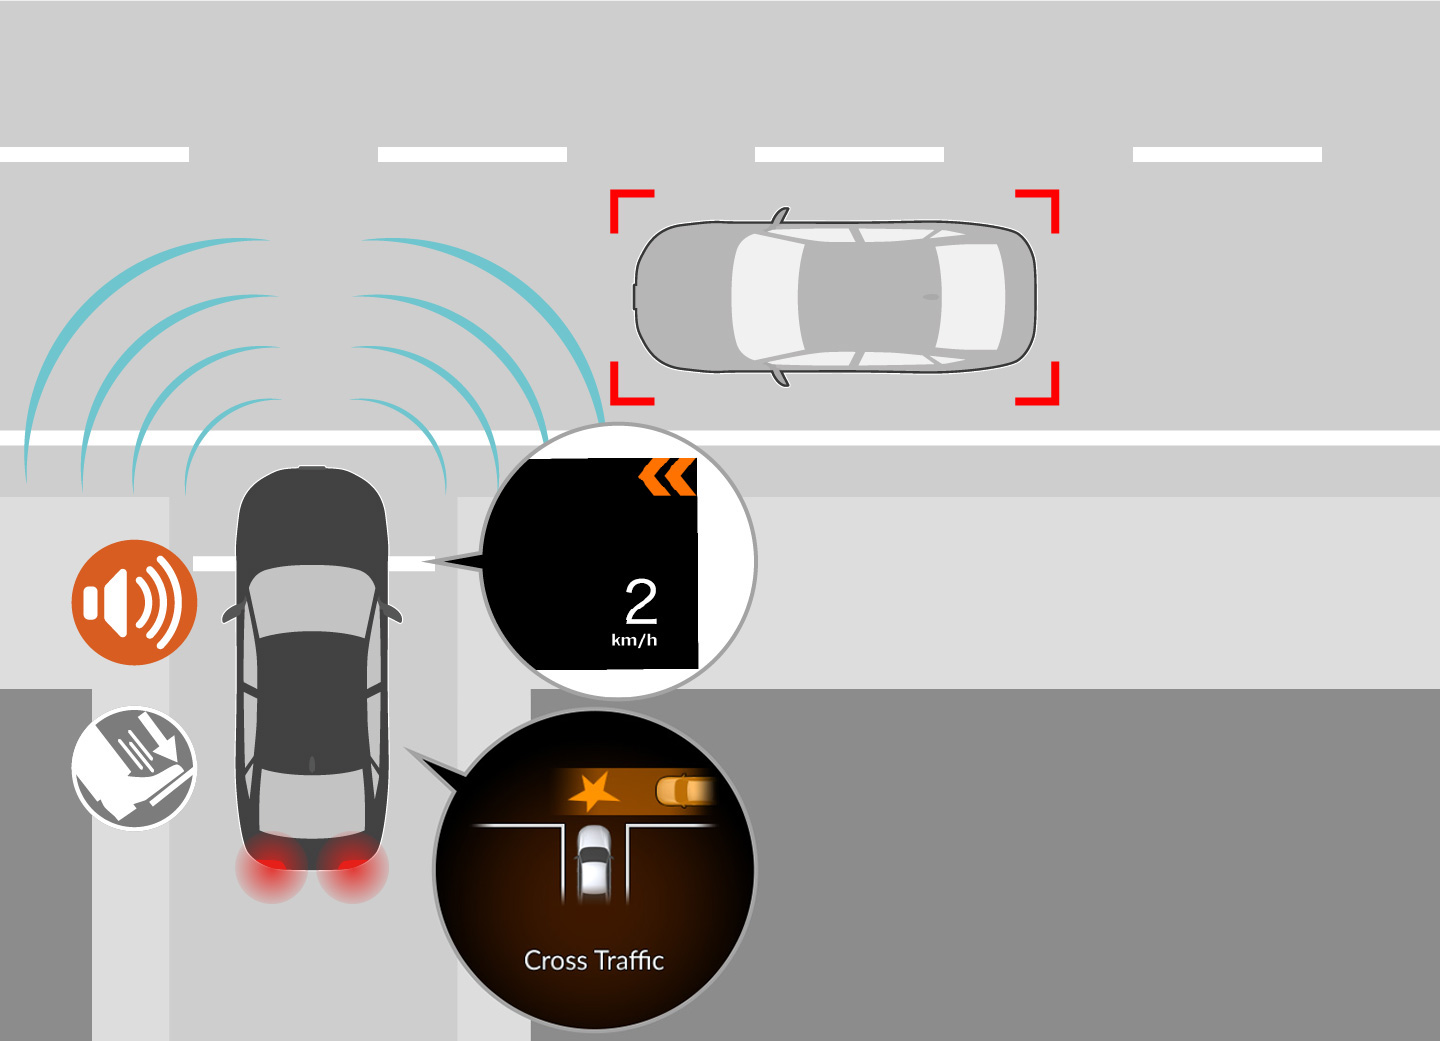 When the risk of collision increases, the system provides audible and visual warnings to prompt collision avoidance actions by the driver.